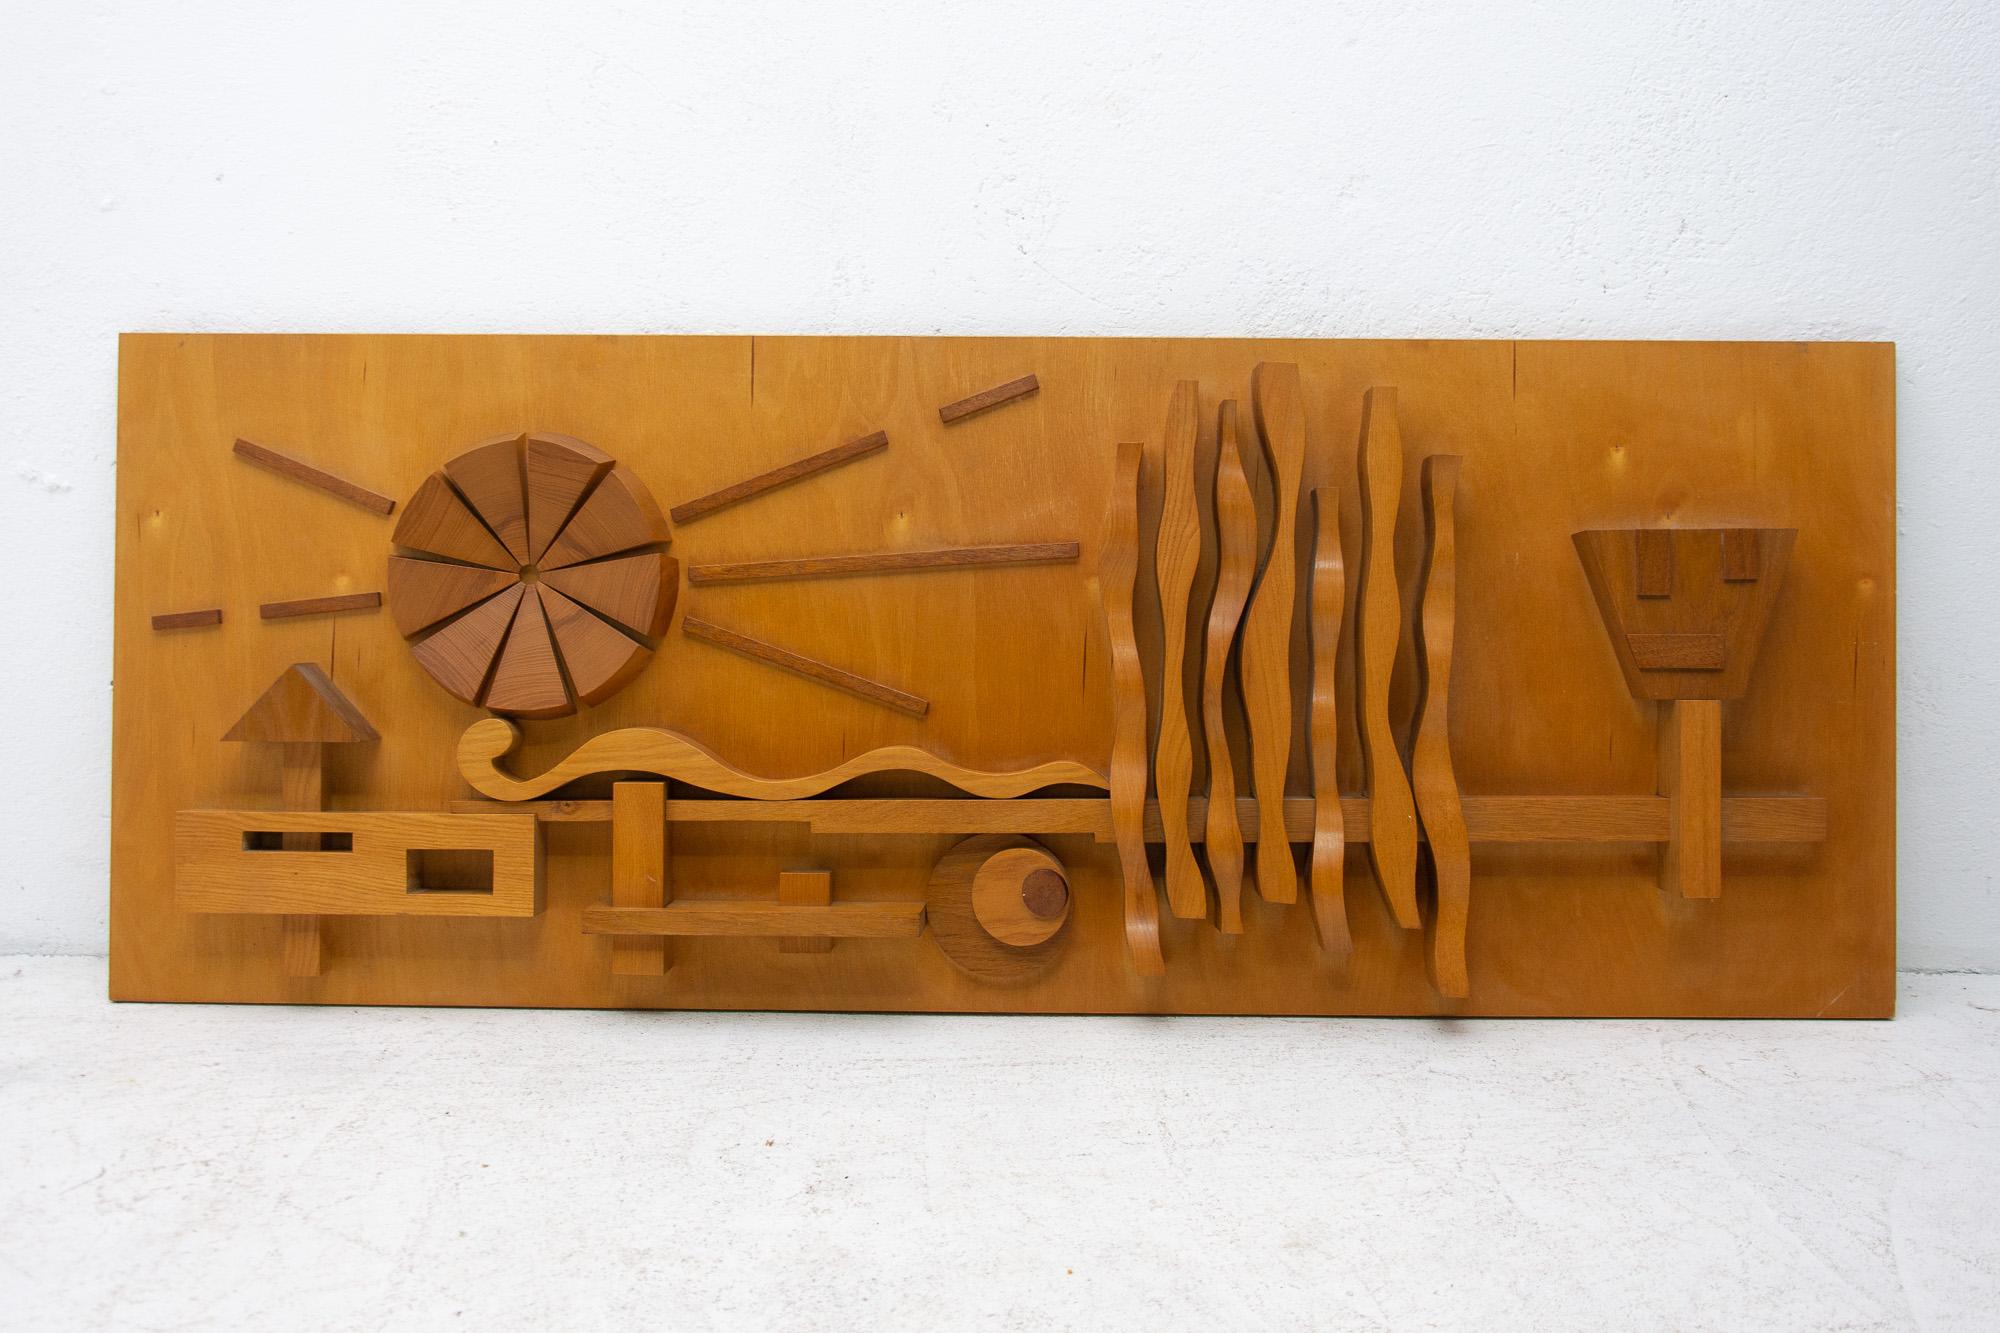 The wooden wall sculpture with the theme of landscape relief comes from one Czechoslovak Hotel and was created in the 1970s. It is a typical example of Czechoslovak design in the communist era of so-called normalization.